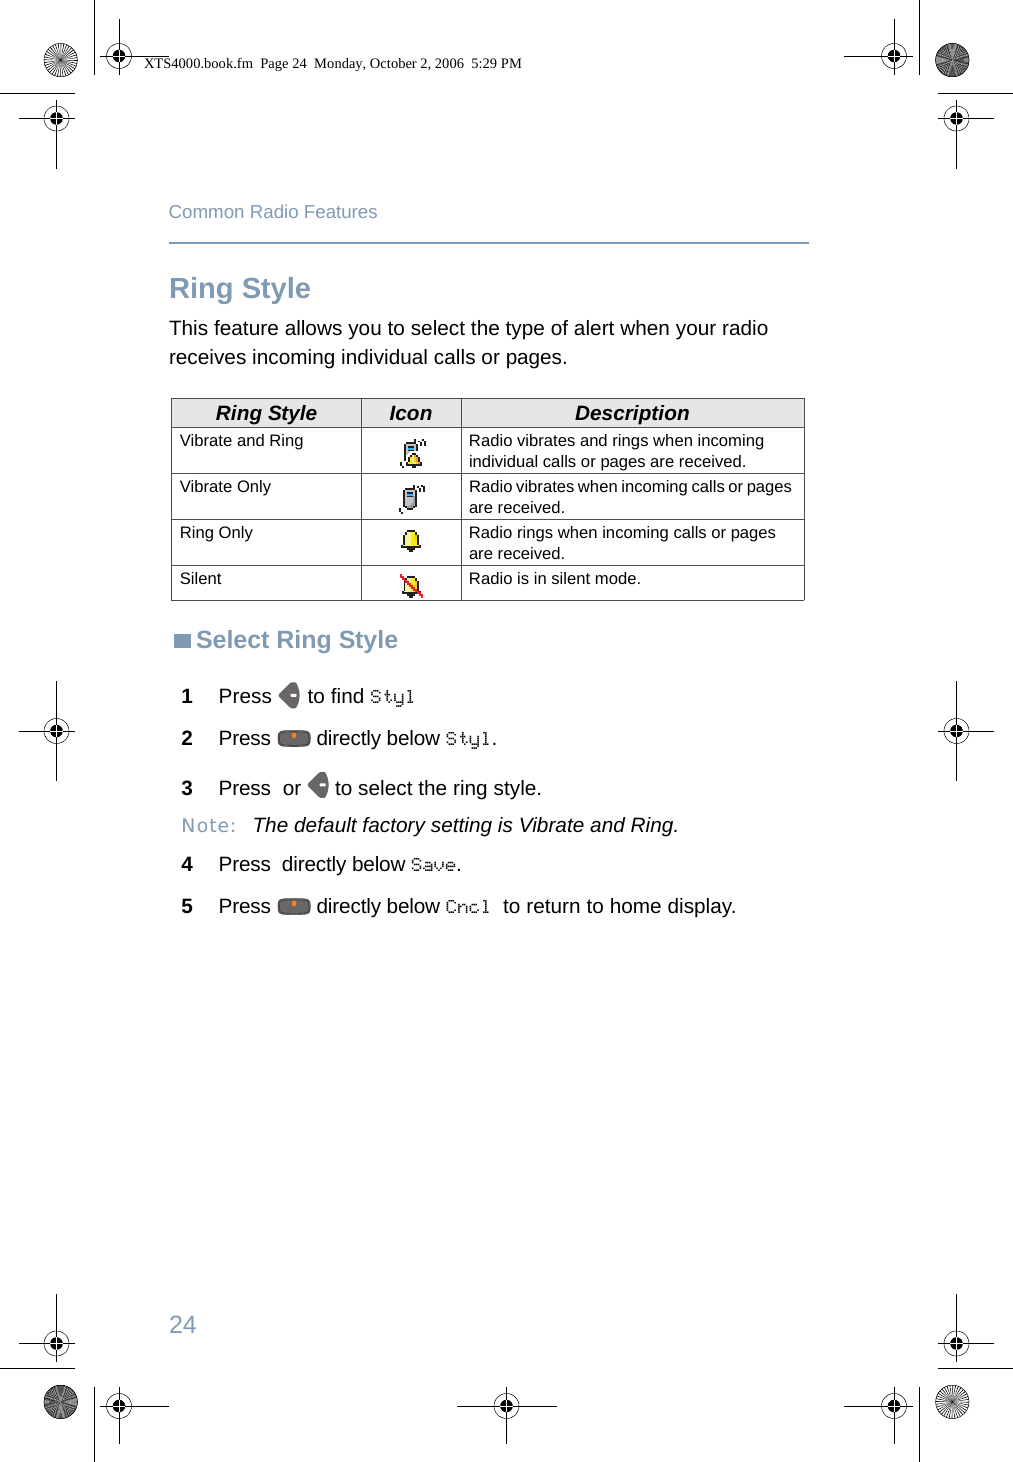 24Common Radio FeaturesRing StyleThis feature allows you to select the type of alert when your radio receives incoming individual calls or pages.Select Ring StyleRing Style Icon DescriptionVibrate and Ring Radio vibrates and rings when incoming individual calls or pages are received.Vibrate Only Radio vibrates when incoming calls or pages are received.Ring Only Radio rings when incoming calls or pages are received.Silent Radio is in silent mode.1Press   to find Styl2Press   directly below Styl. 3Press  or   to select the ring style.Note: The default factory setting is Vibrate and Ring.4Press  directly below Save.5Press   directly below Cncl to return to home display.XTS4000.book.fm  Page 24  Monday, October 2, 2006  5:29 PM